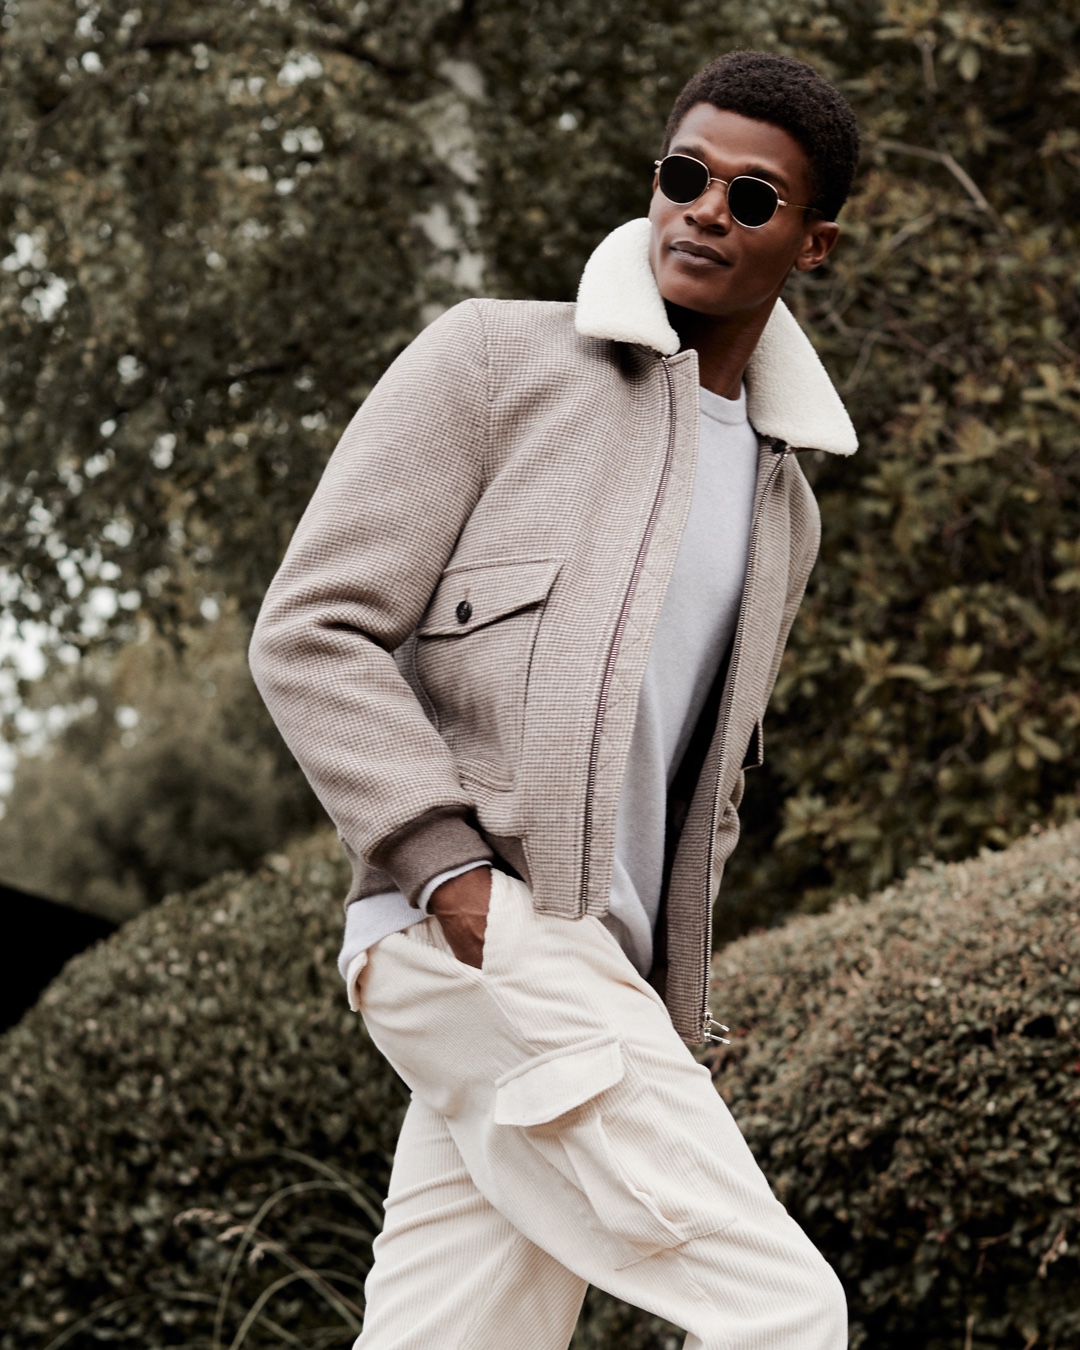 Reiss on Twitter: "Winterwear | Our signature coats for men joined by an  array of pieces with the spirit of the moment. Discover the editorial  online: https://t.co/E6hn3eBwqZ https://t.co/Kf9AcruREv" / Twitter